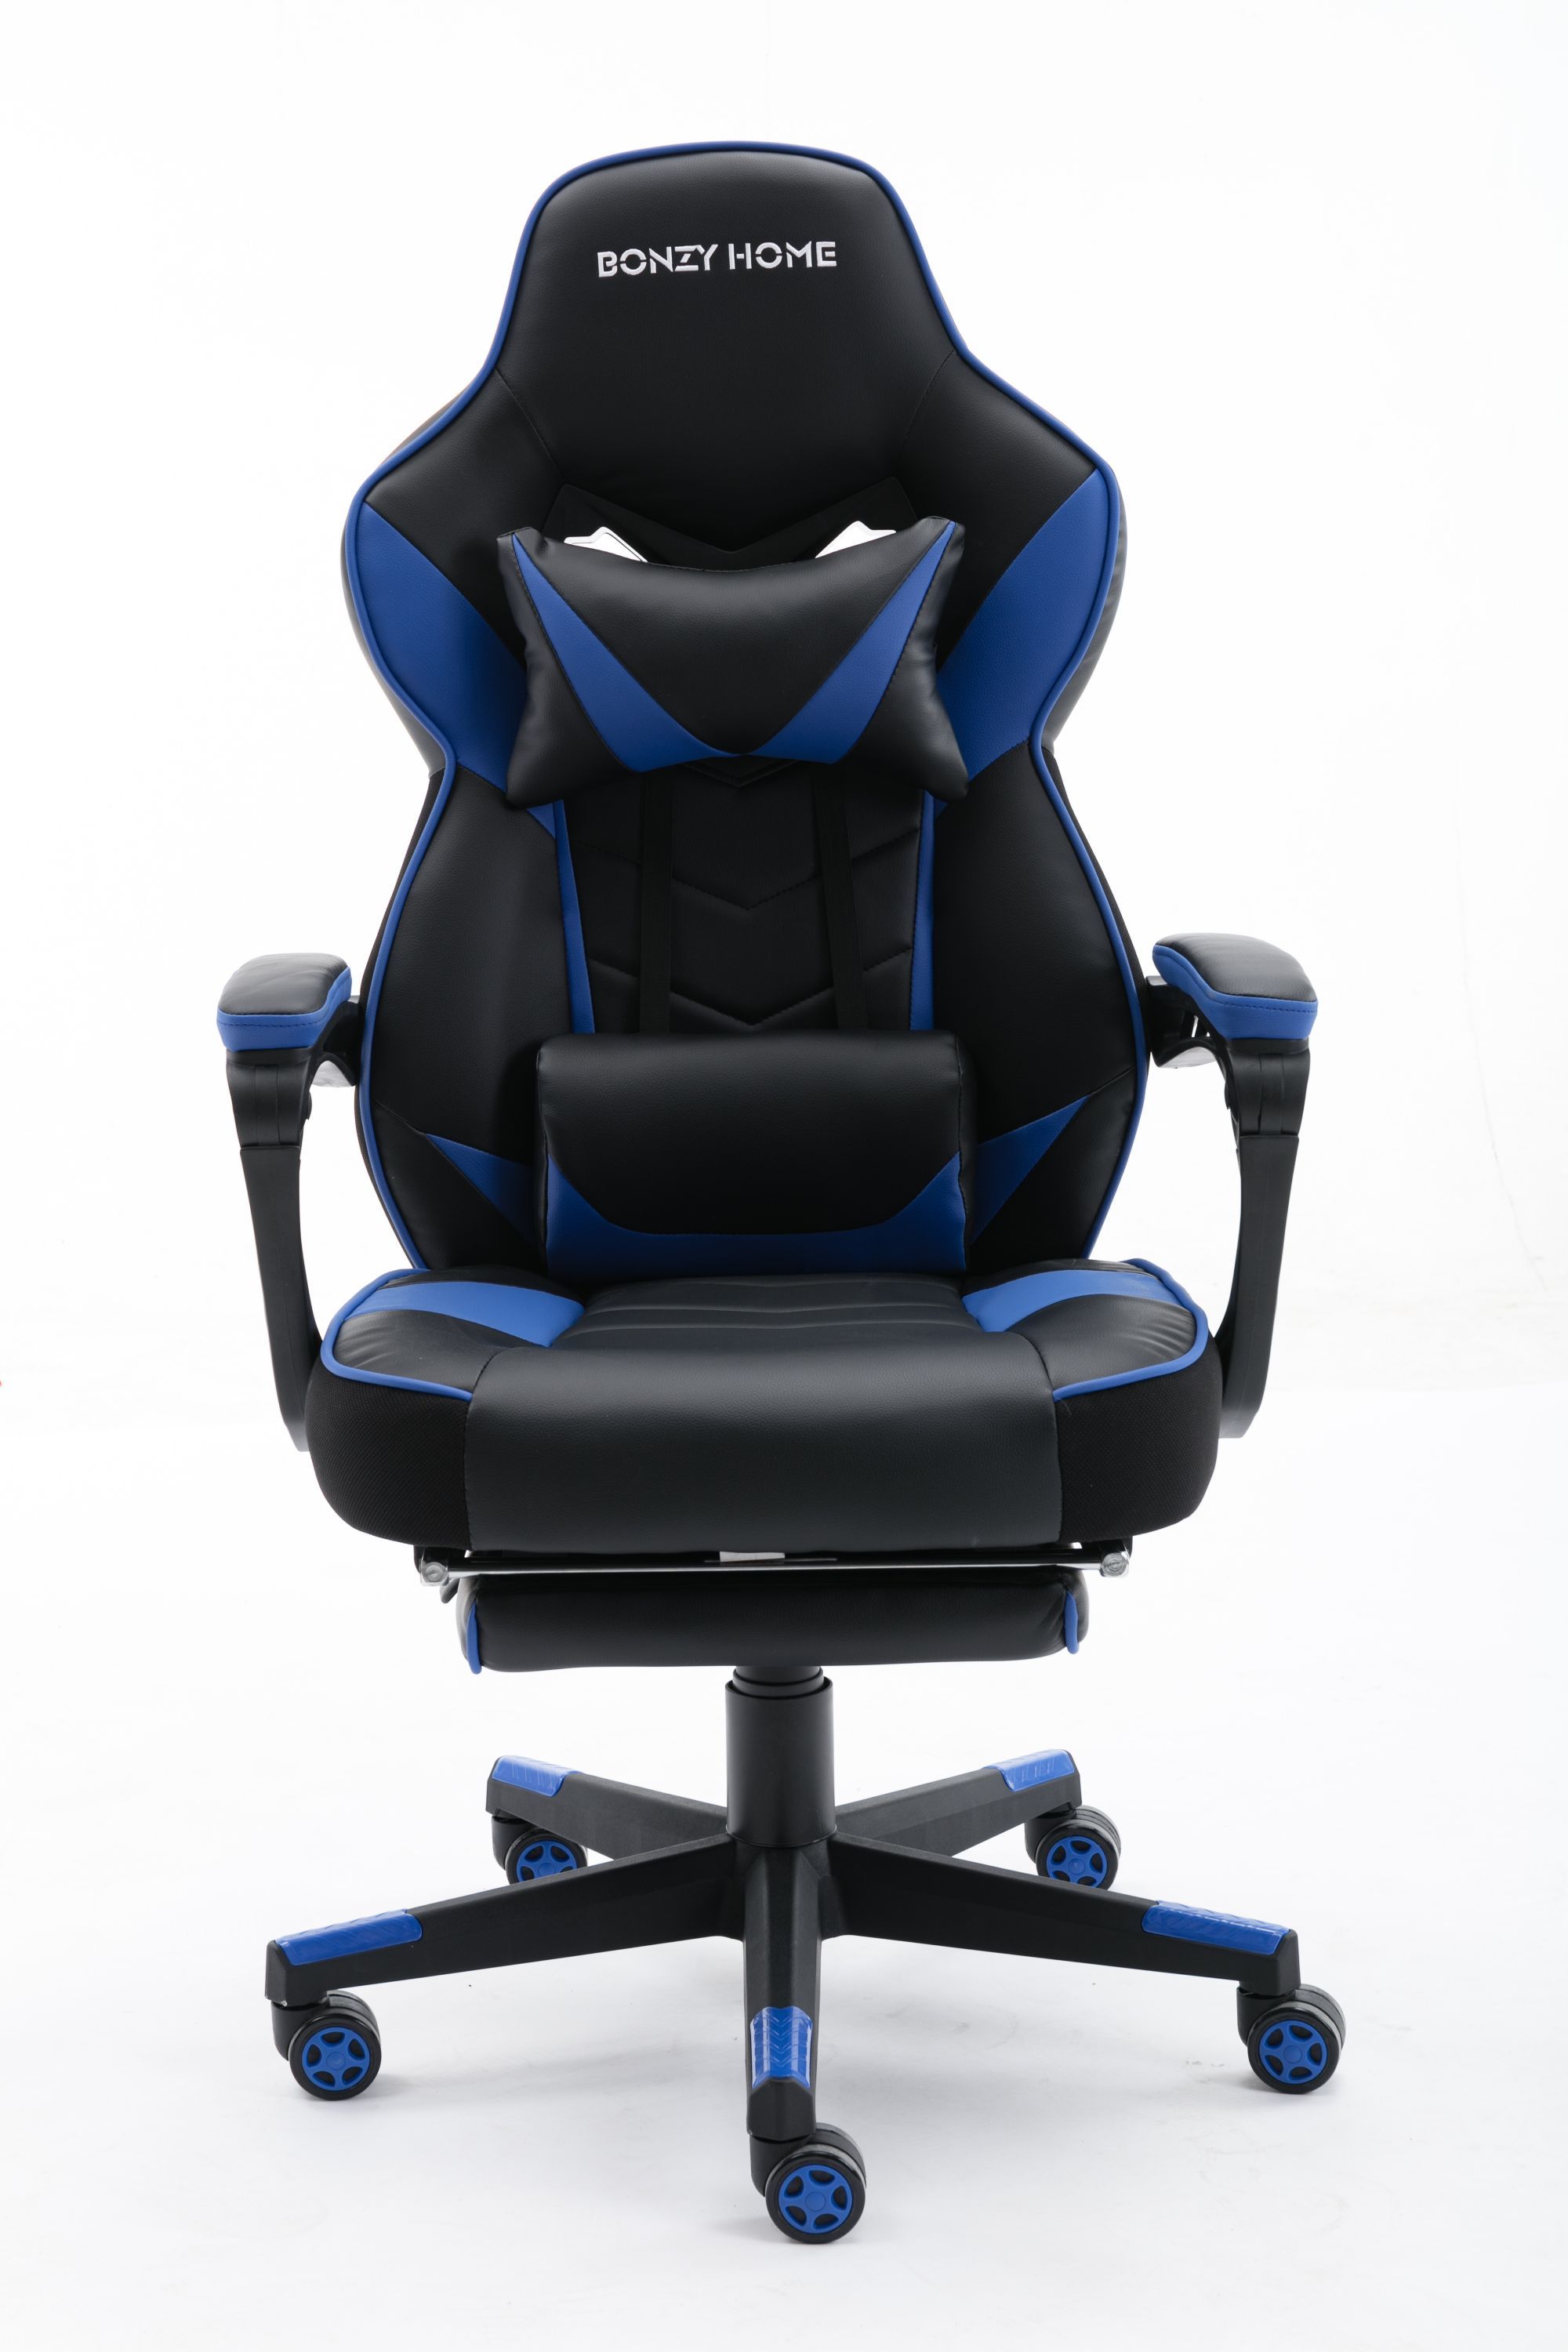 Details about   Office Chair,Ergonomic PU Desk Task Executive Chair Rolling Swivel Adjustable 